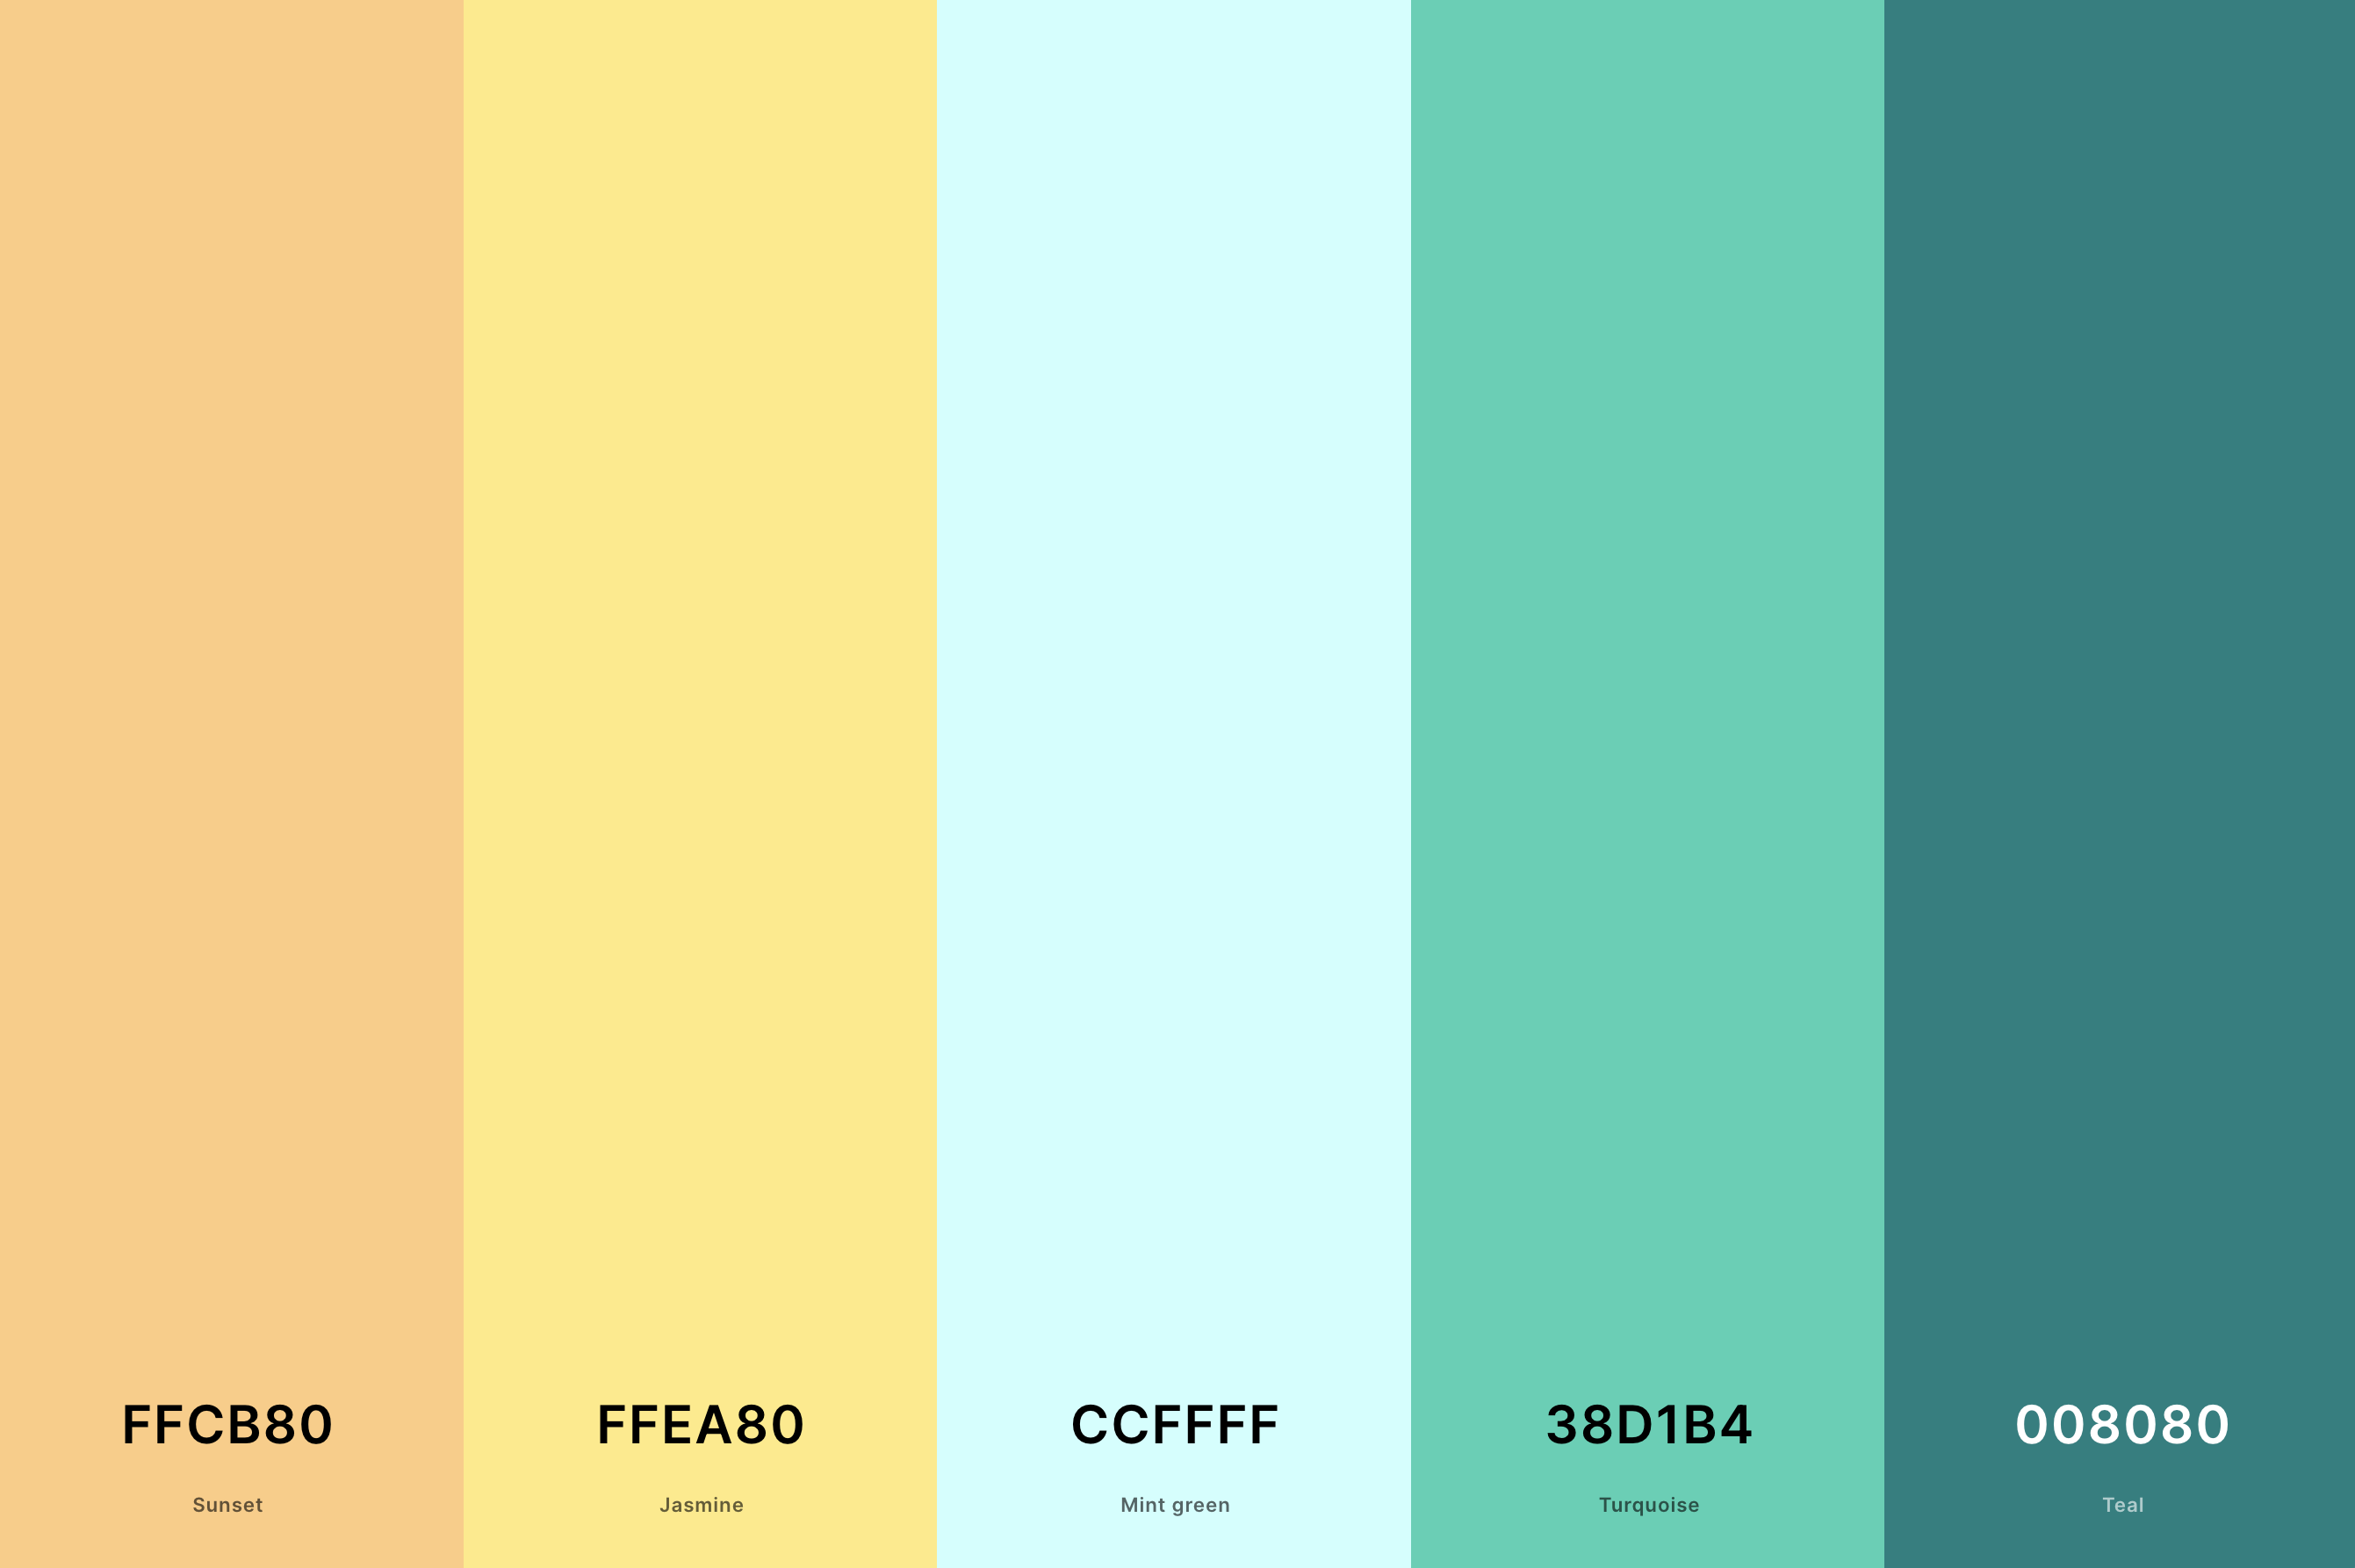 25. Teal And Yellow Color Palette Color Palette with Sunset (Hex #FFCB80) + Jasmine (Hex #FFEA80) + Mint Green (Hex #CCFFFF) + Turquoise (Hex #38D1B4) + Teal (Hex #008080) Color Palette with Hex Codes